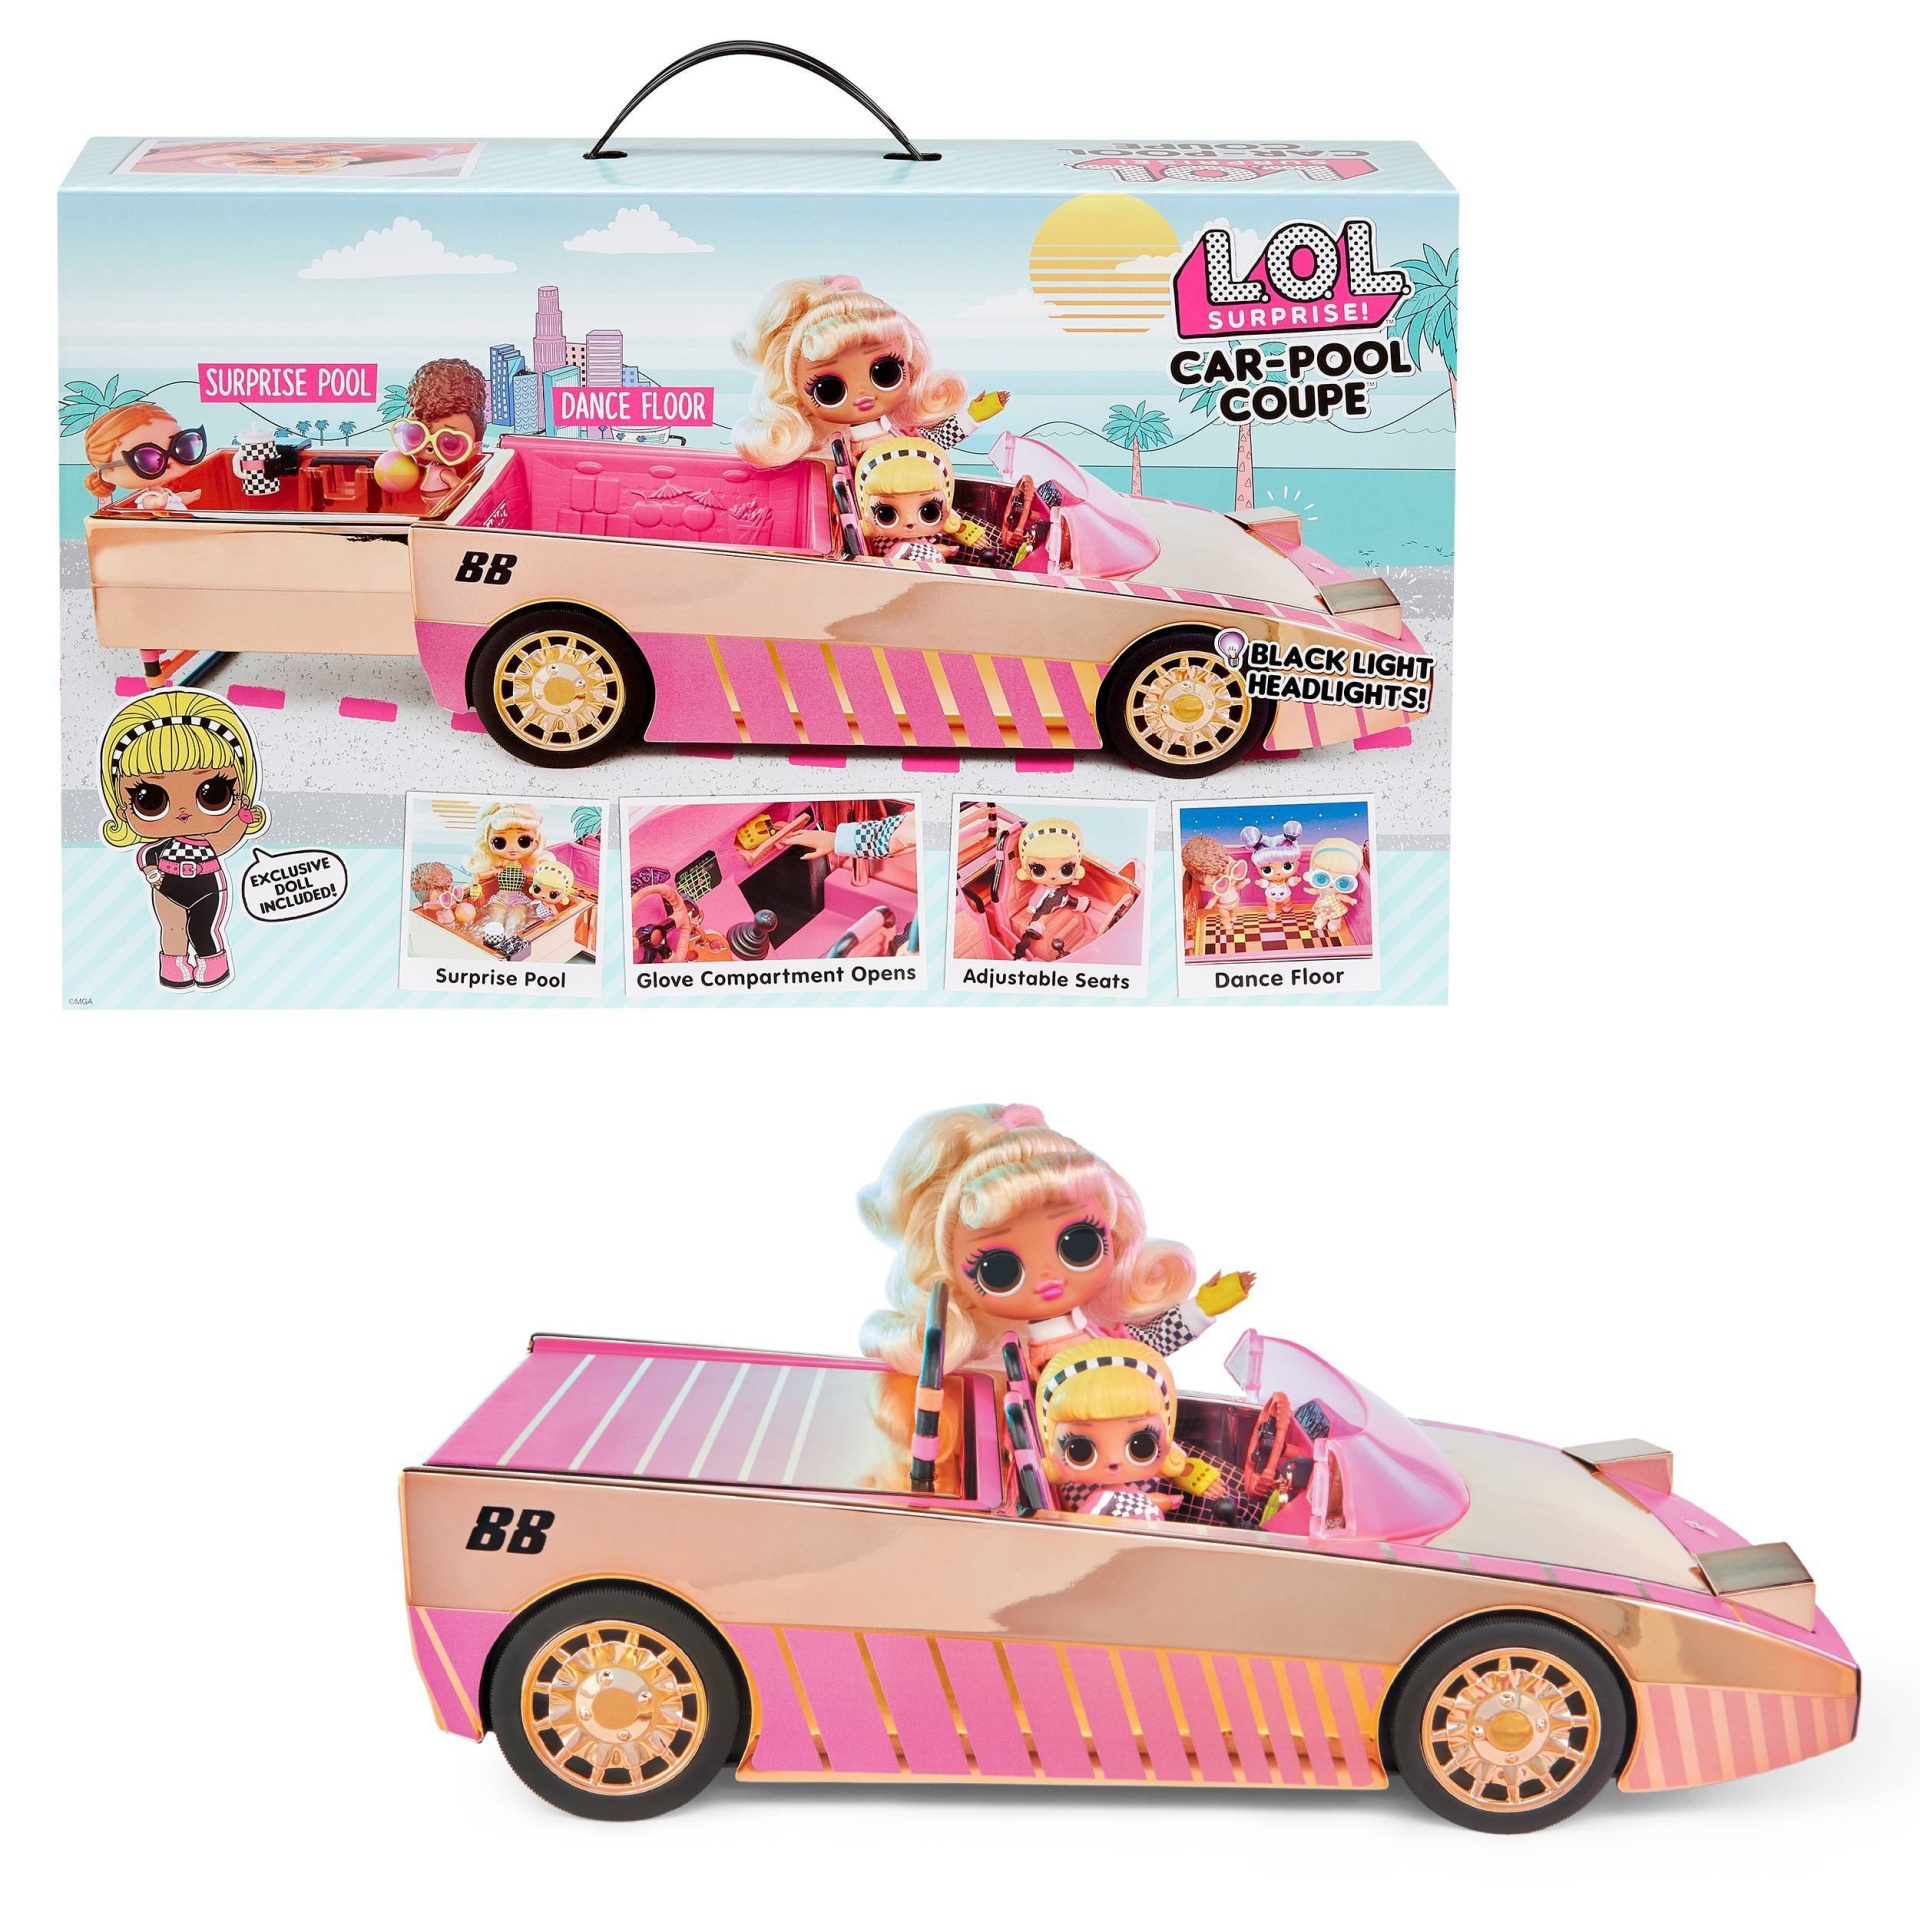 slide 1 of 7, L.O.L. Surprise! Car Pool Coupe with Exclusive Doll, Surprise Pool and Dance Floor, 1 ct